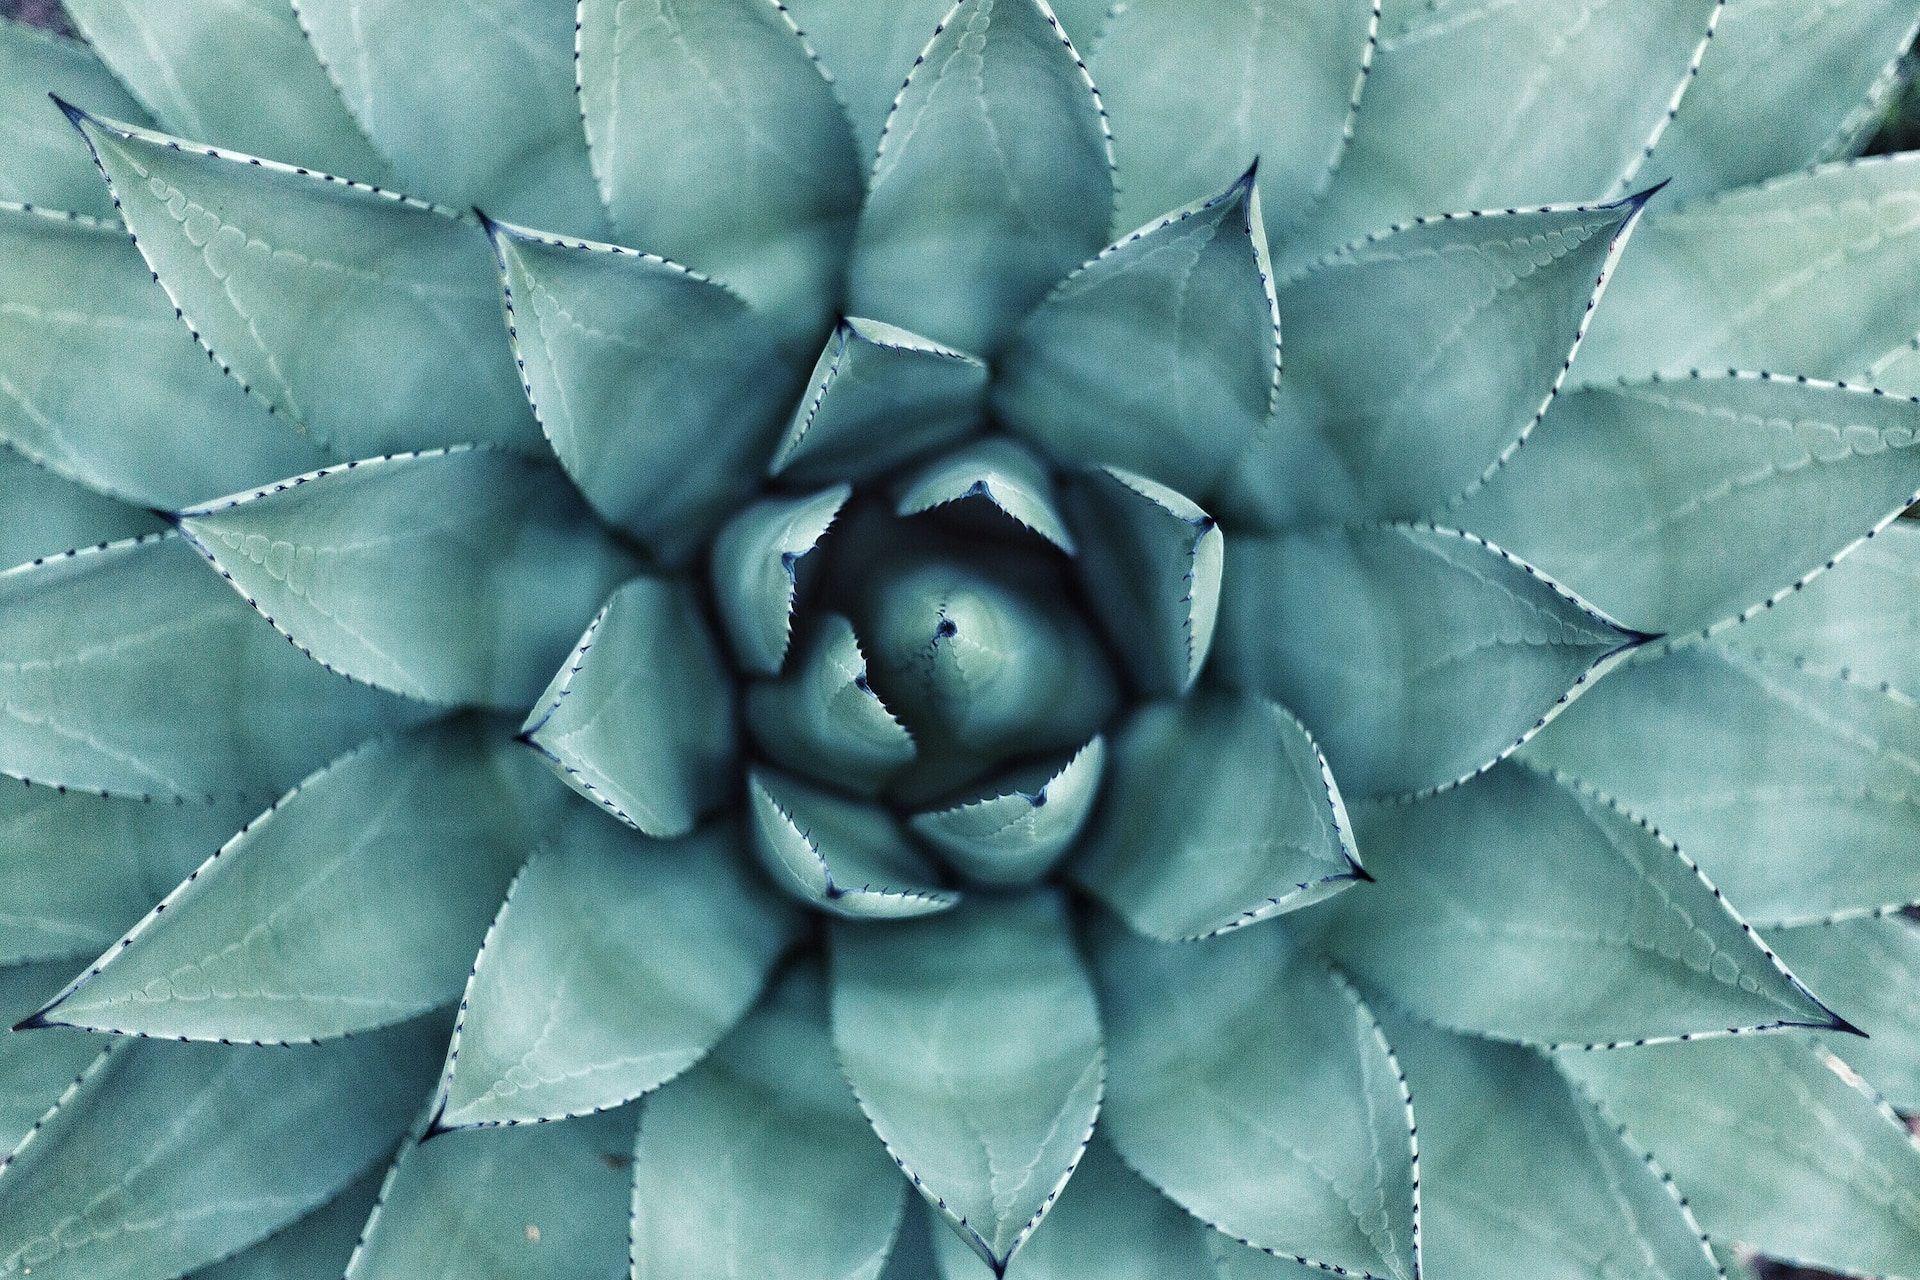 centre of a succulent in close-up/macro